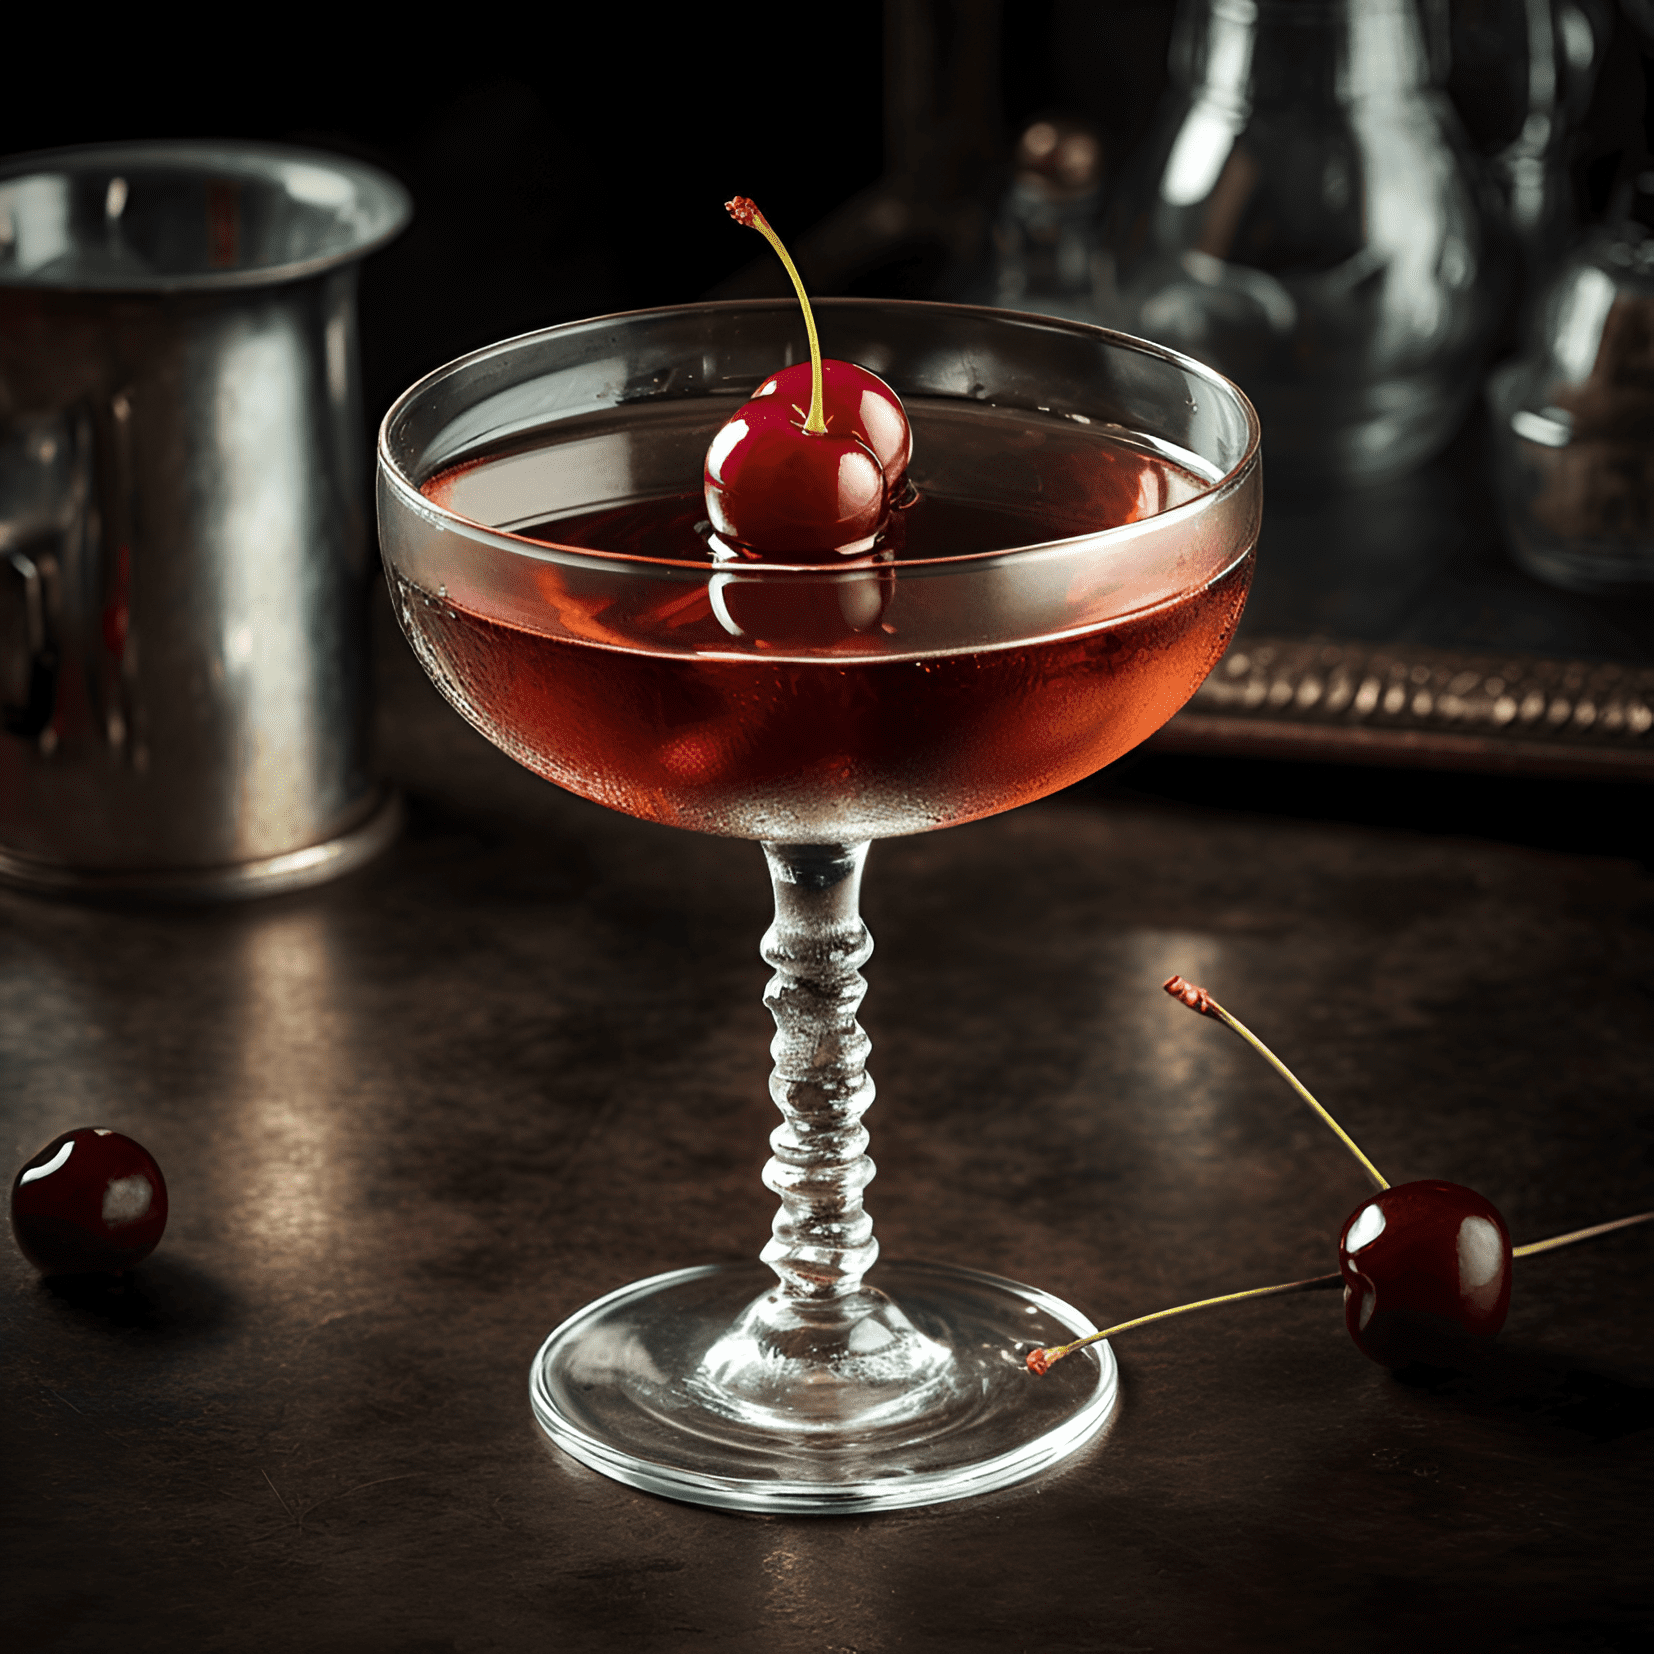 Midnight Cocktail Recipe - The Midnight cocktail offers a harmonious blend of sweet, sour, and slightly bitter flavors. It has a rich and velvety texture, with a warming sensation from the alcohol. The taste is complex, yet well-balanced, making it a delightful and intriguing drink.